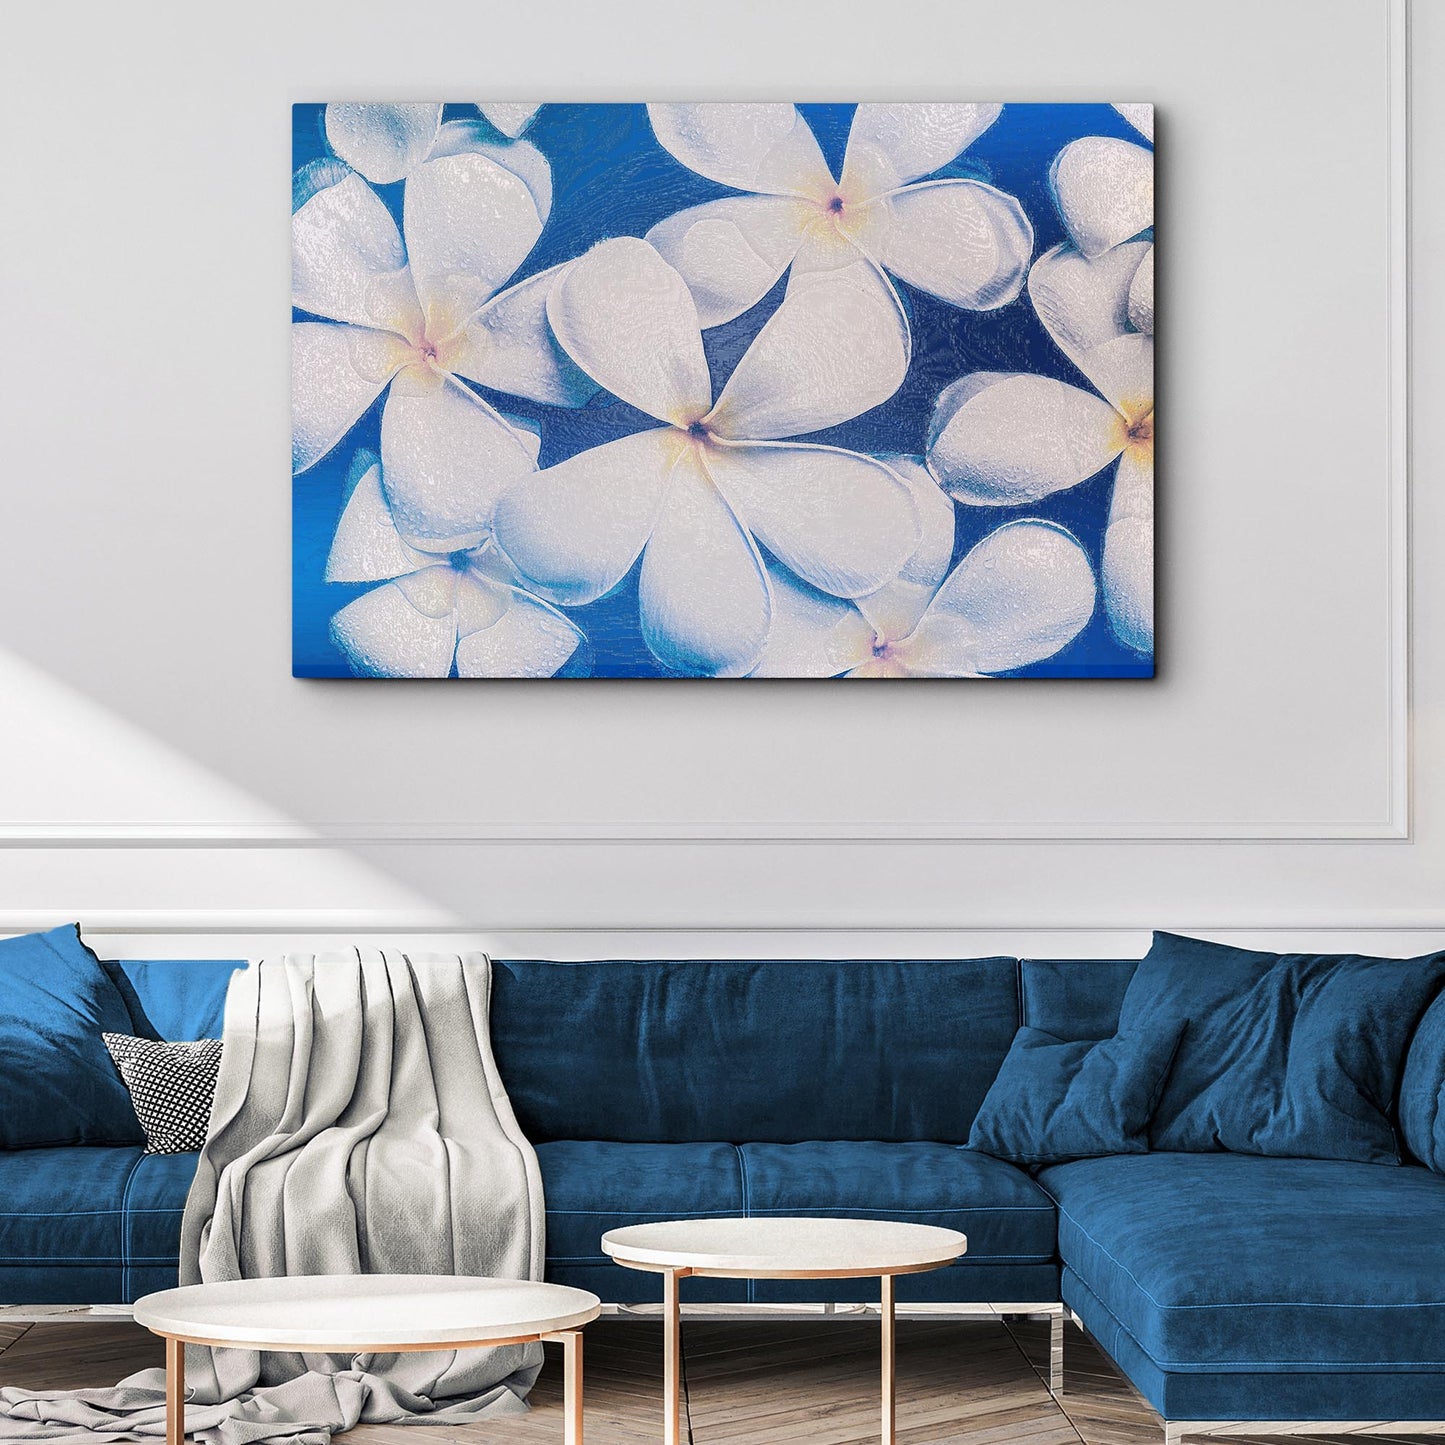 Bright White Frangipani Canvas Wall Art Style 2 - Image by Tailored Canvases